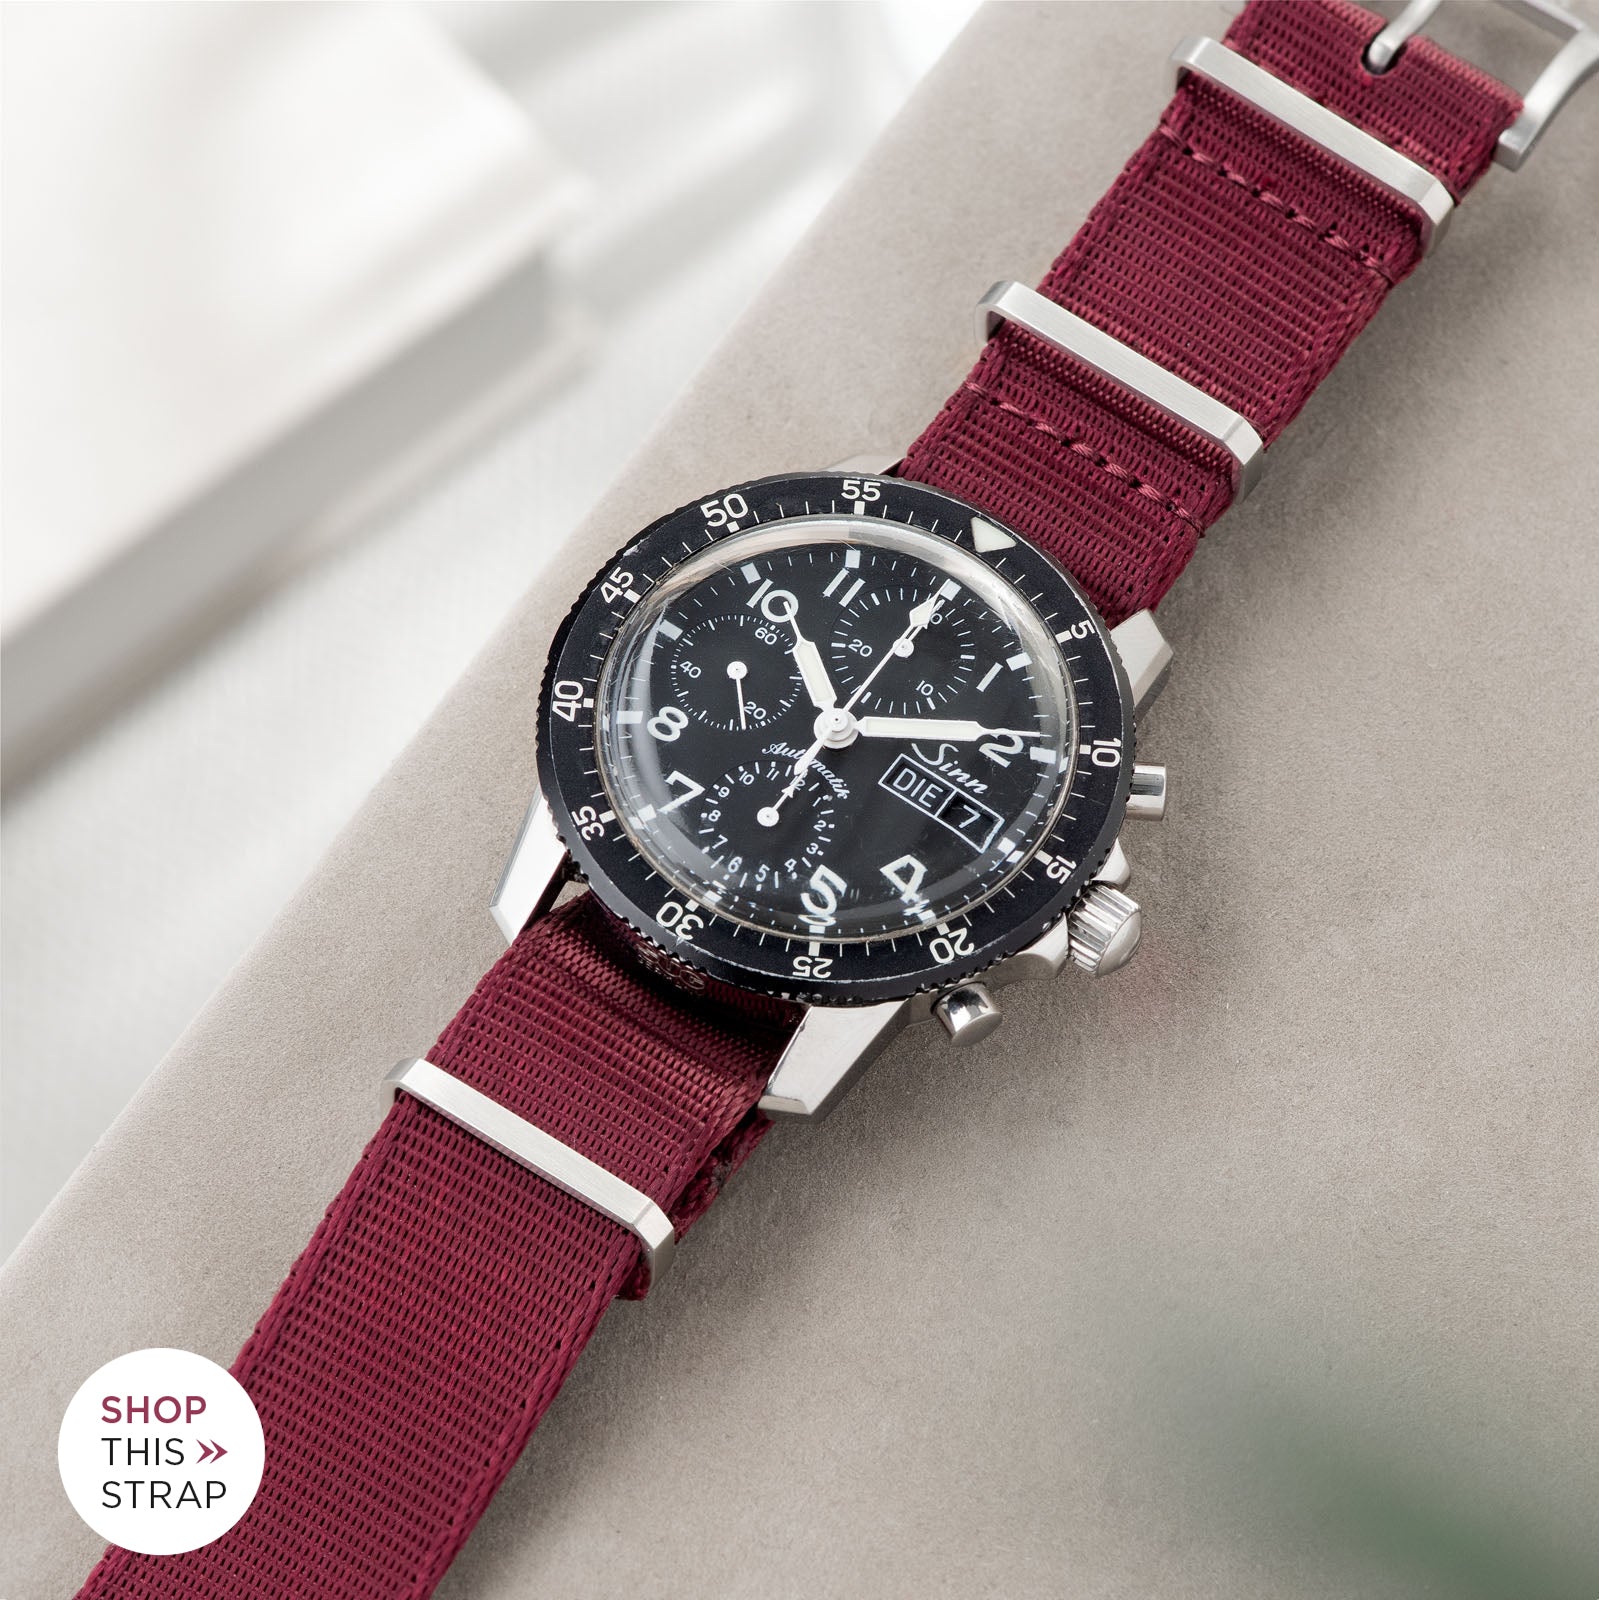 Bulang and Sons_Strap Guide_Sinn 103St Flieder Chronograph_Deluxe Nylon Nato Watch Strap Burgundy Red